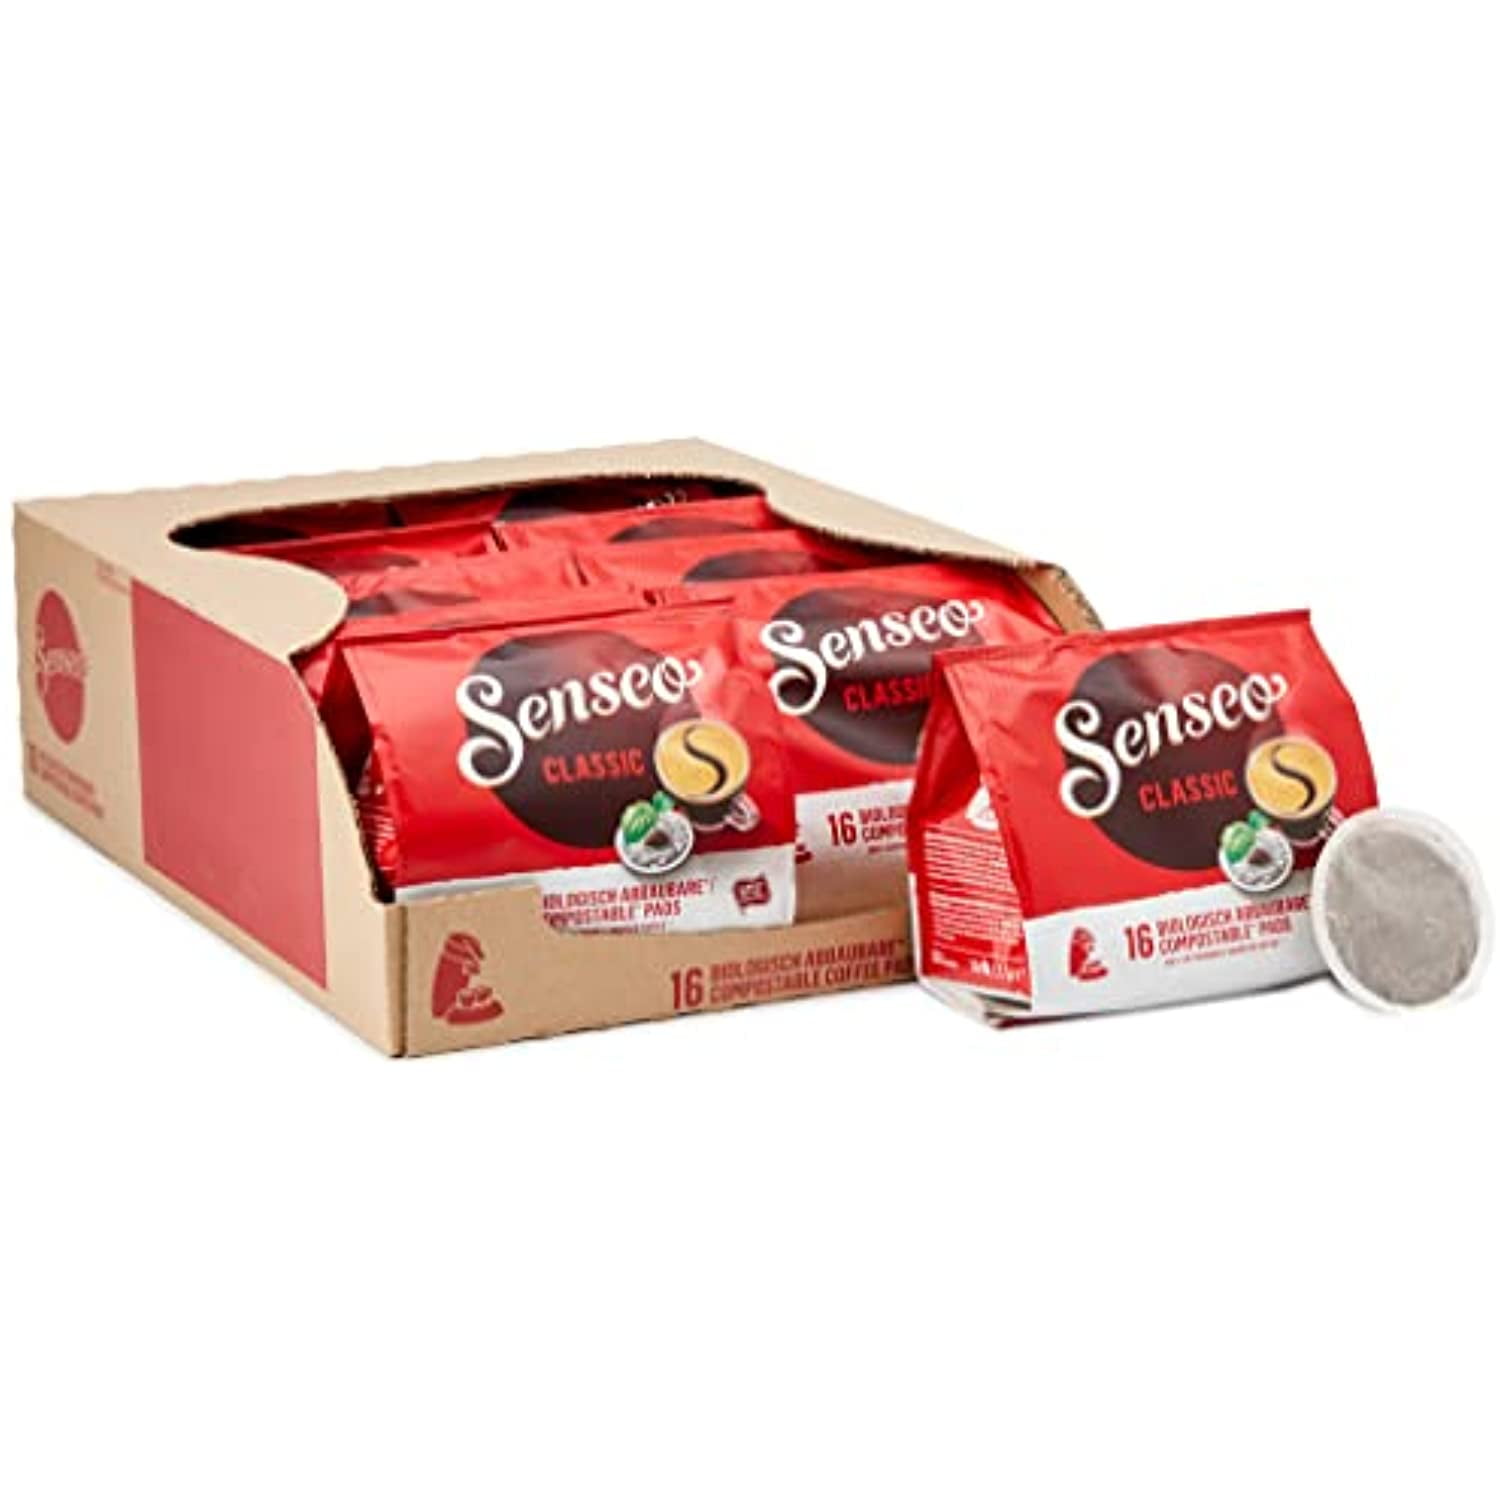 Senseo Cappuccino Coffee Pods - (Pack of 10 X 8 Pods)